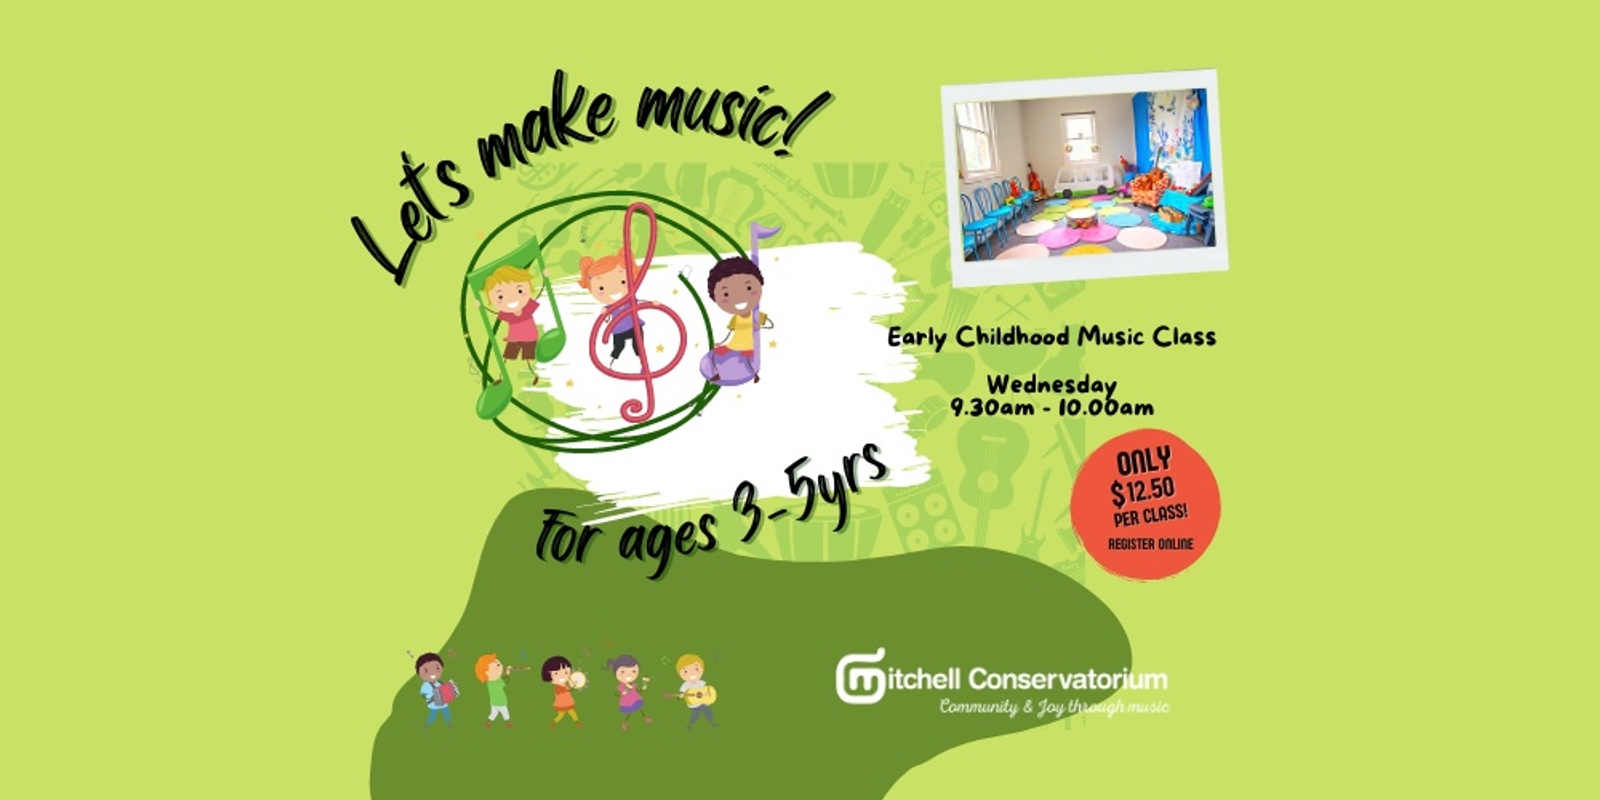 EARLY CHILDHOOD MUSIC - 3 to 5 years Wednesday